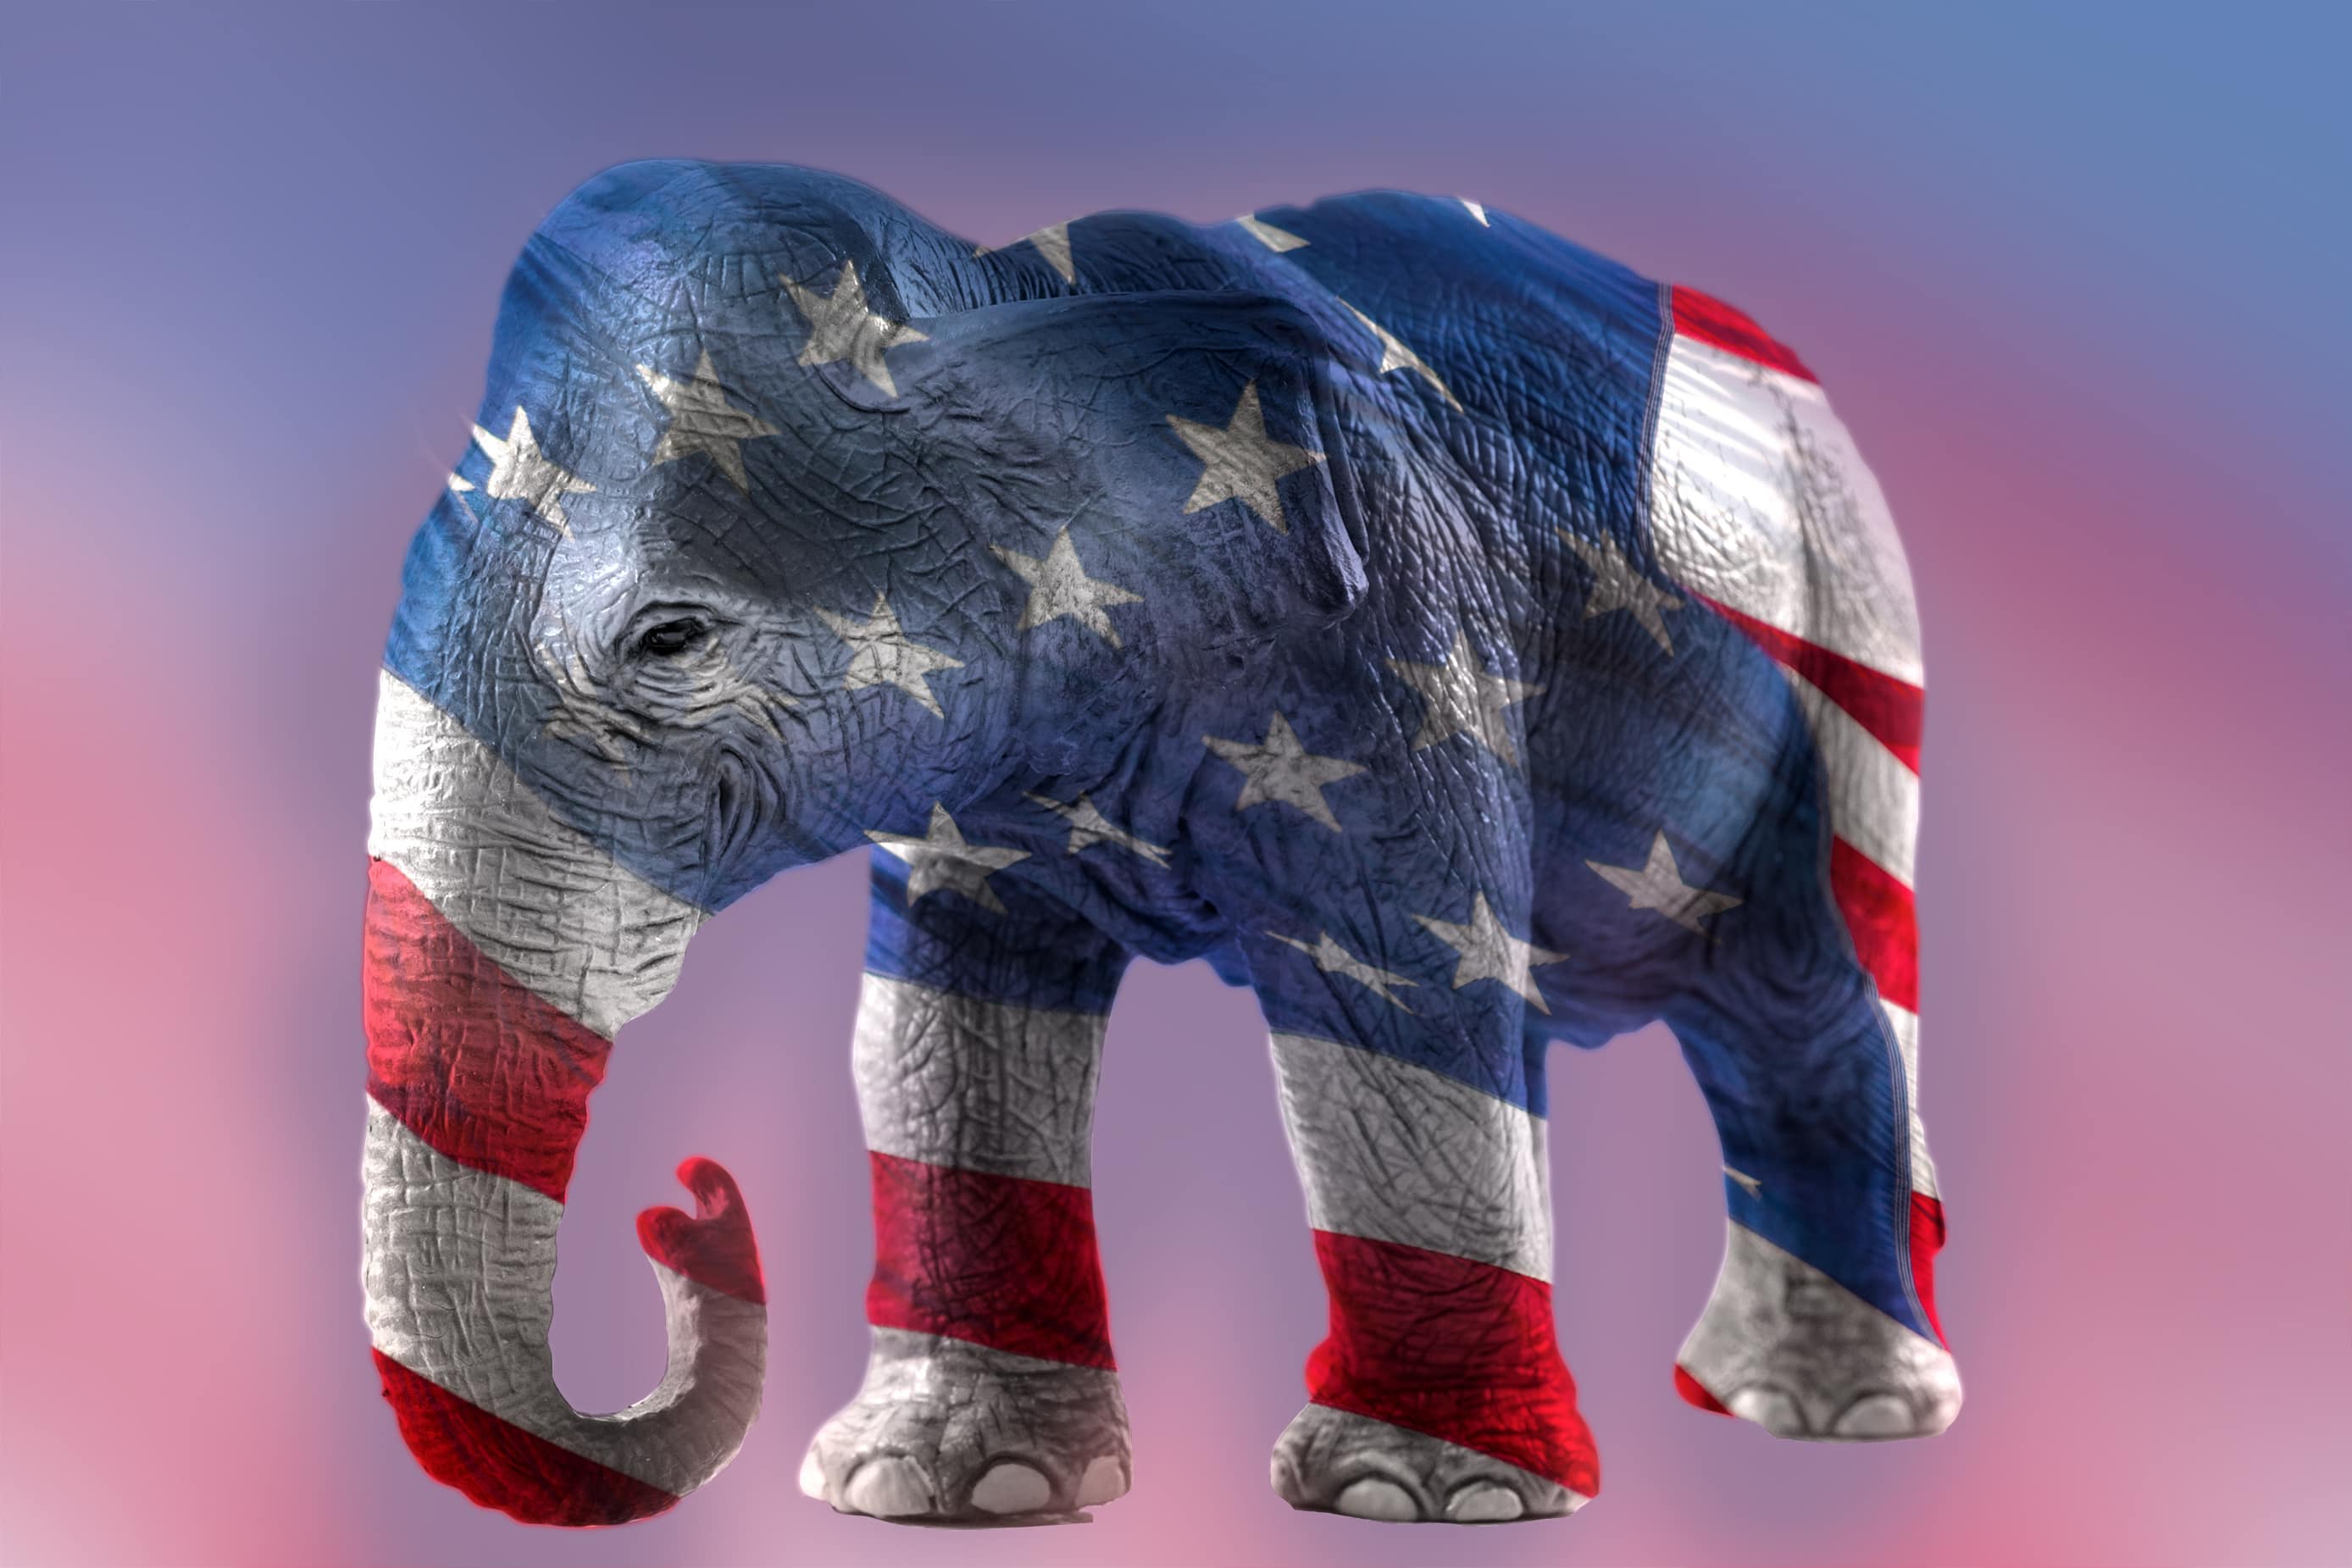 Double exposure image of the Republican elephant and the american flag. In the USA politics the elephant is the symbol of the republicans, the party that represents conservative views